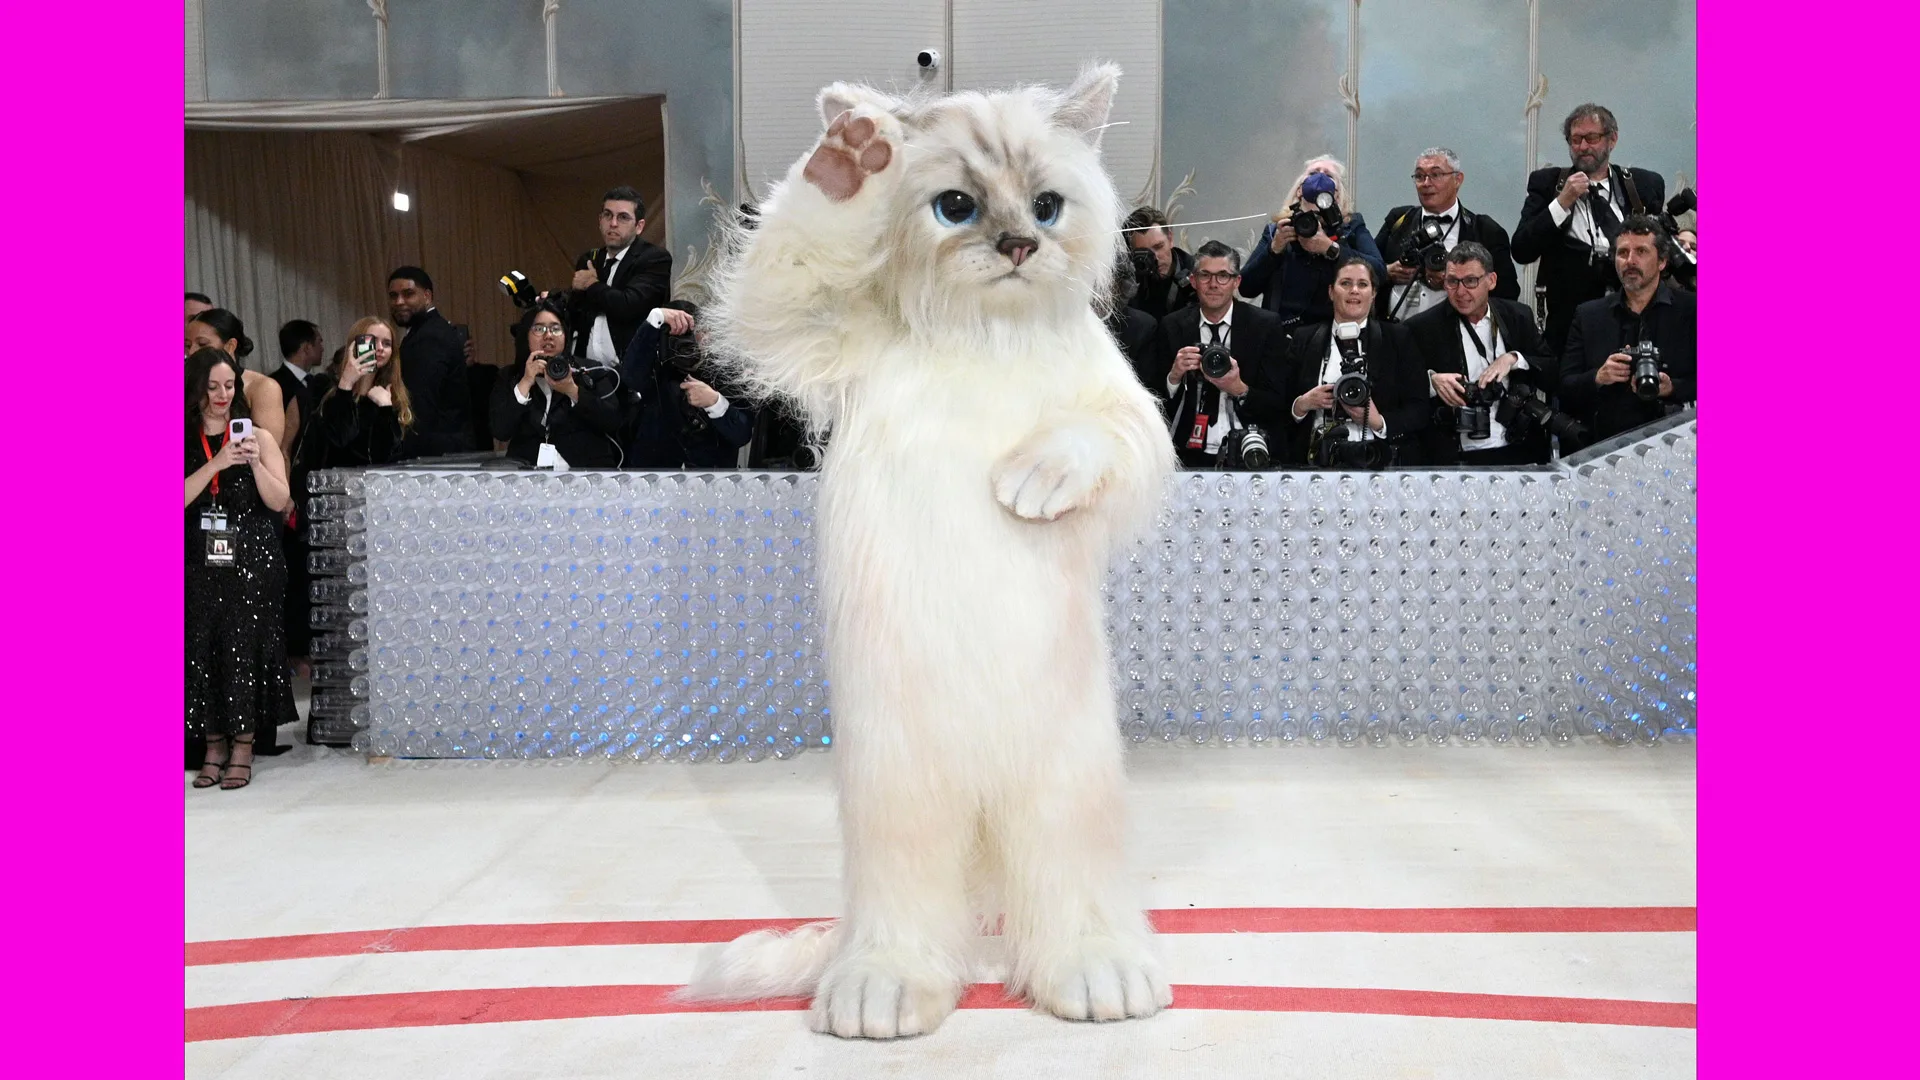 A photo of Jared Leto at the Met Gala dressed as a giant white cat with press behind him taking photographs